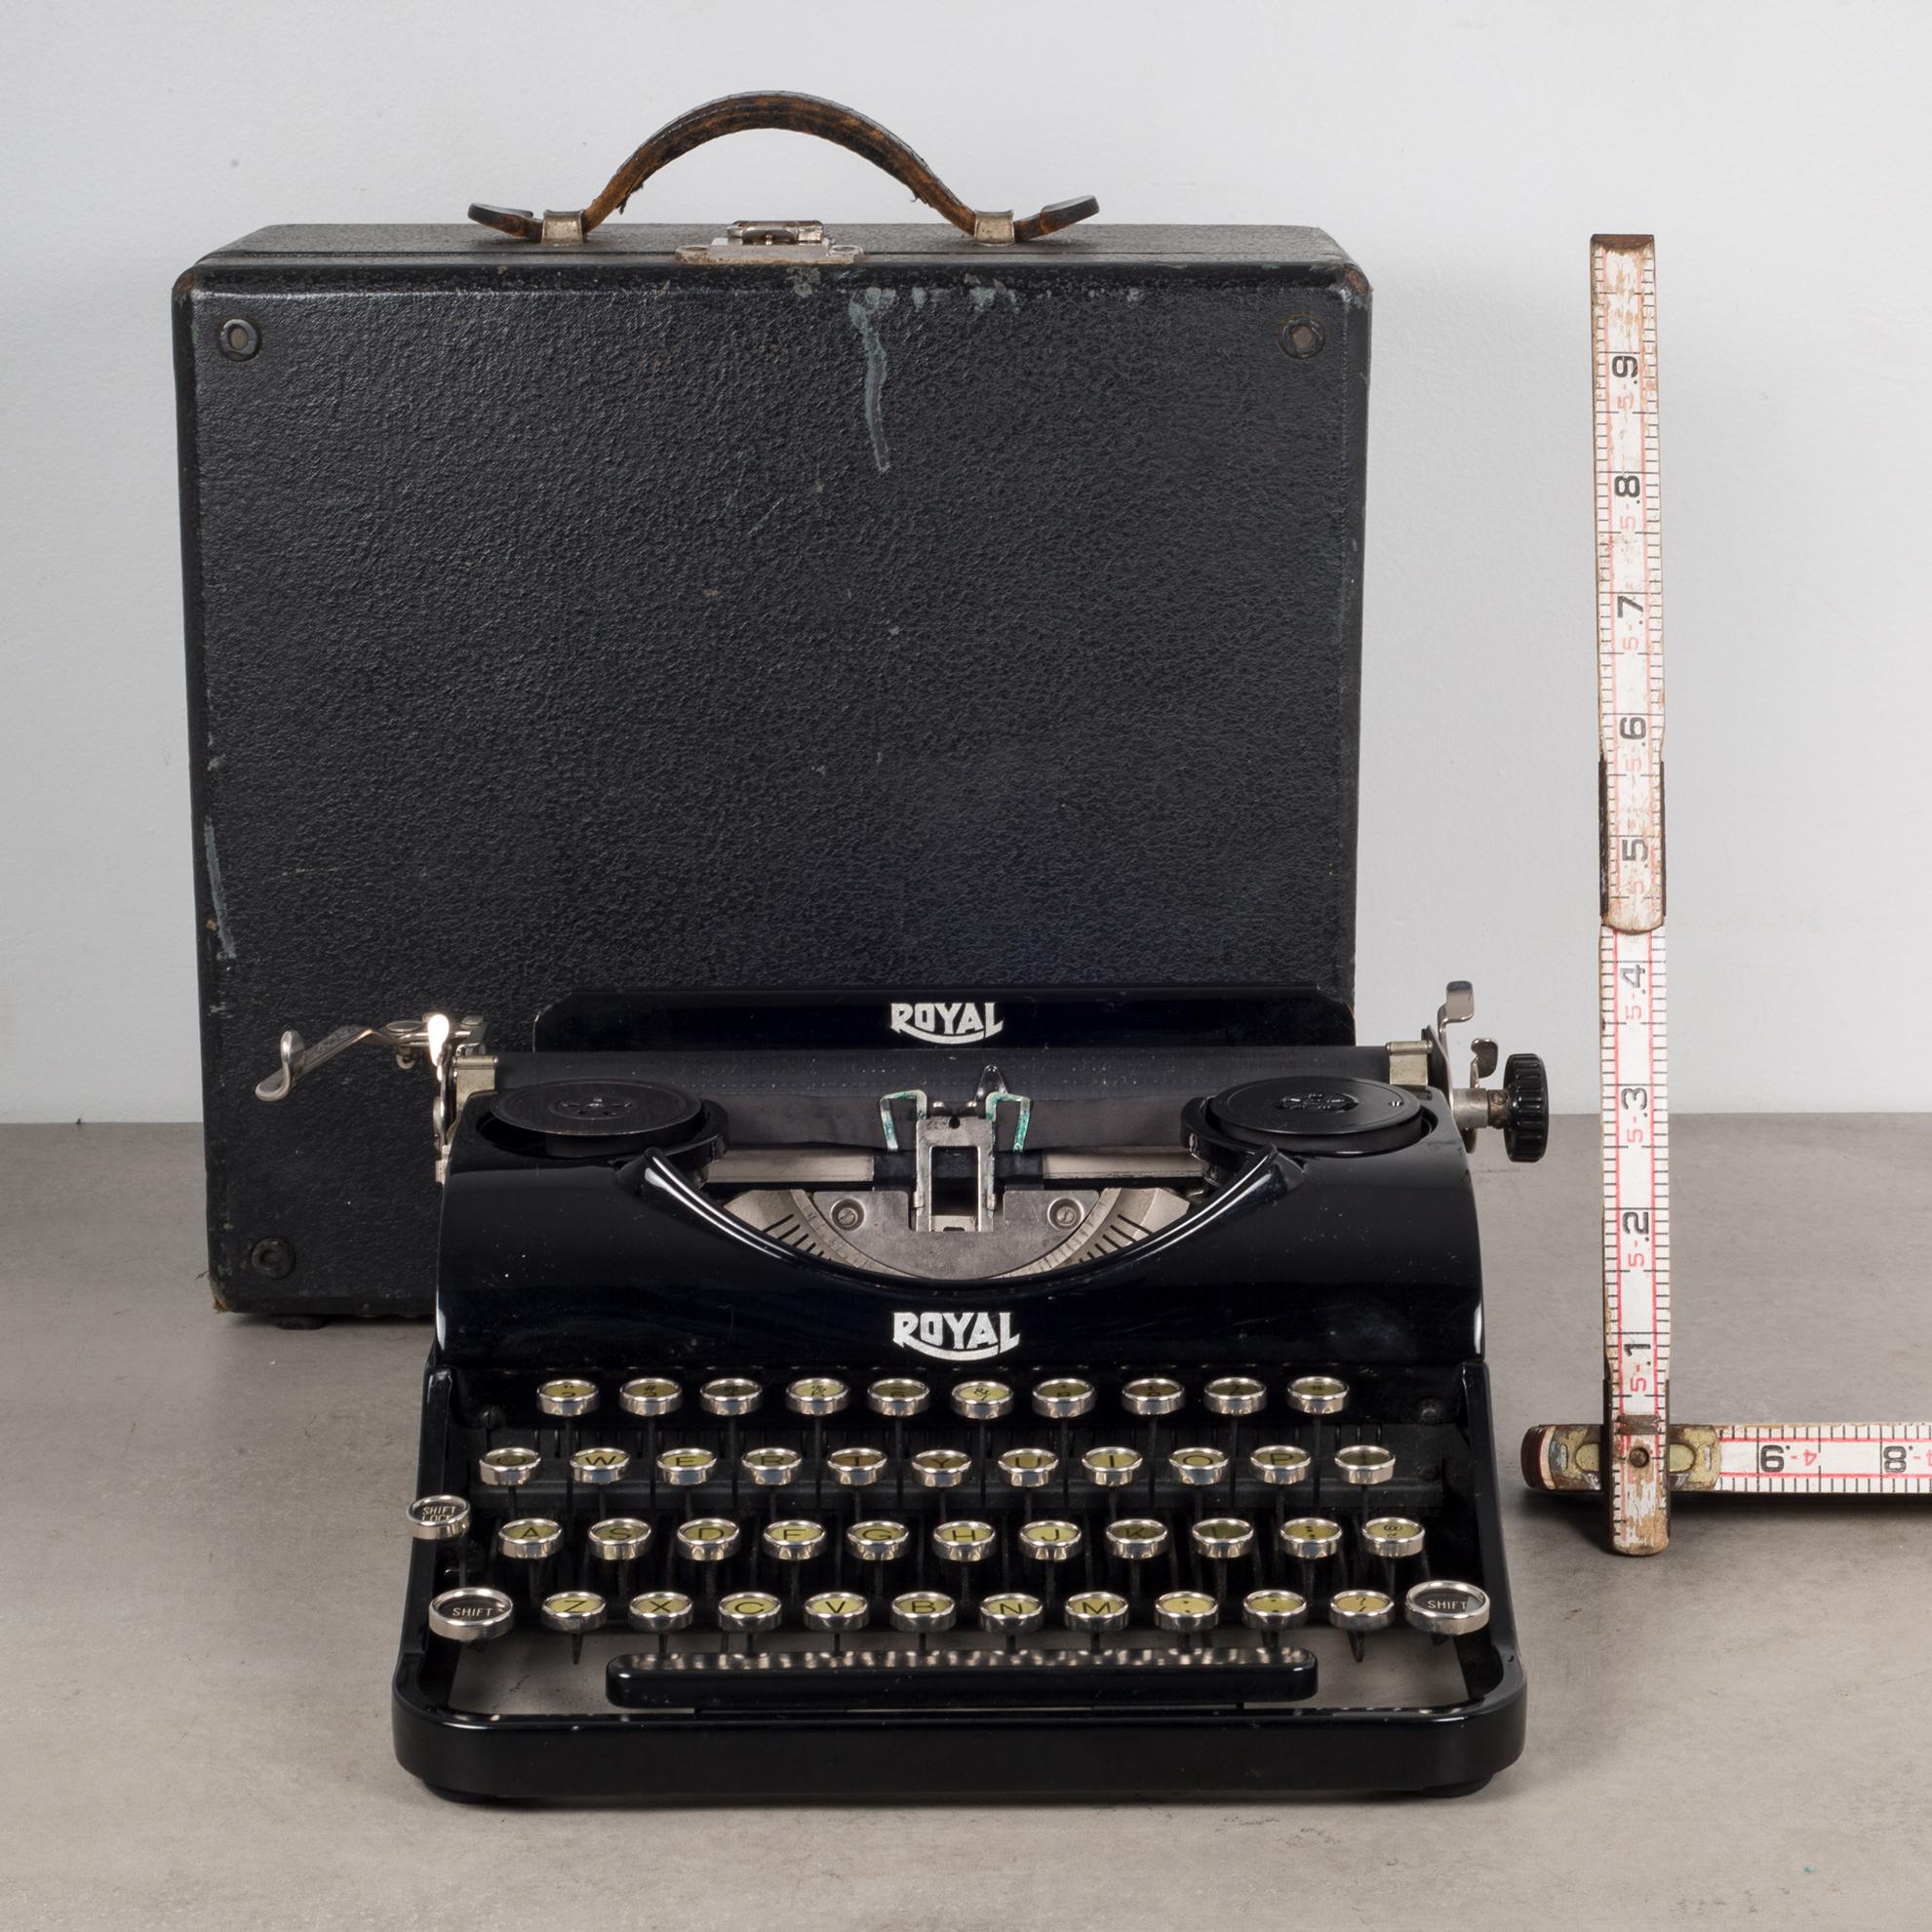 About:

This is a depression era Royal Junior typewriter. The original advertising for this model stated 